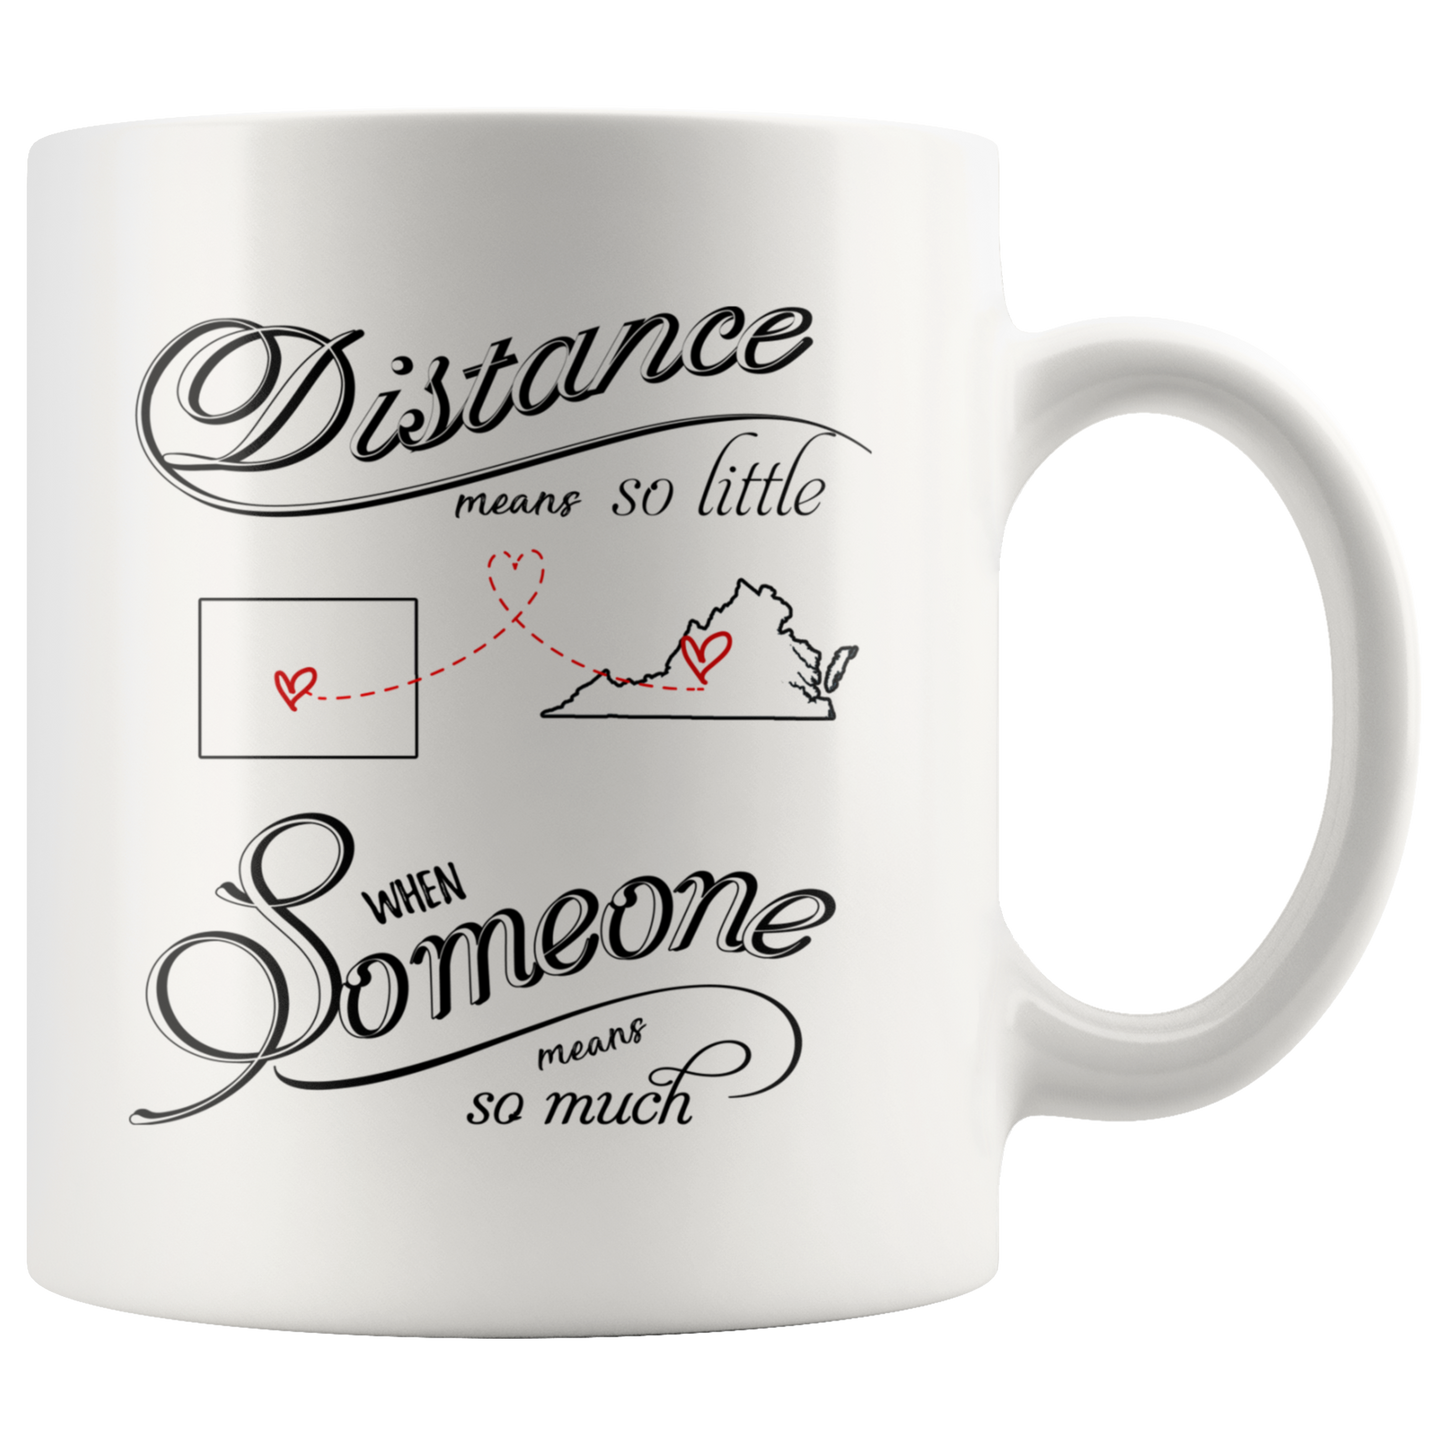 M-20485335-sp-23255 - Mothers Day Coffee Mug Colorado Virginia Distance Means So L